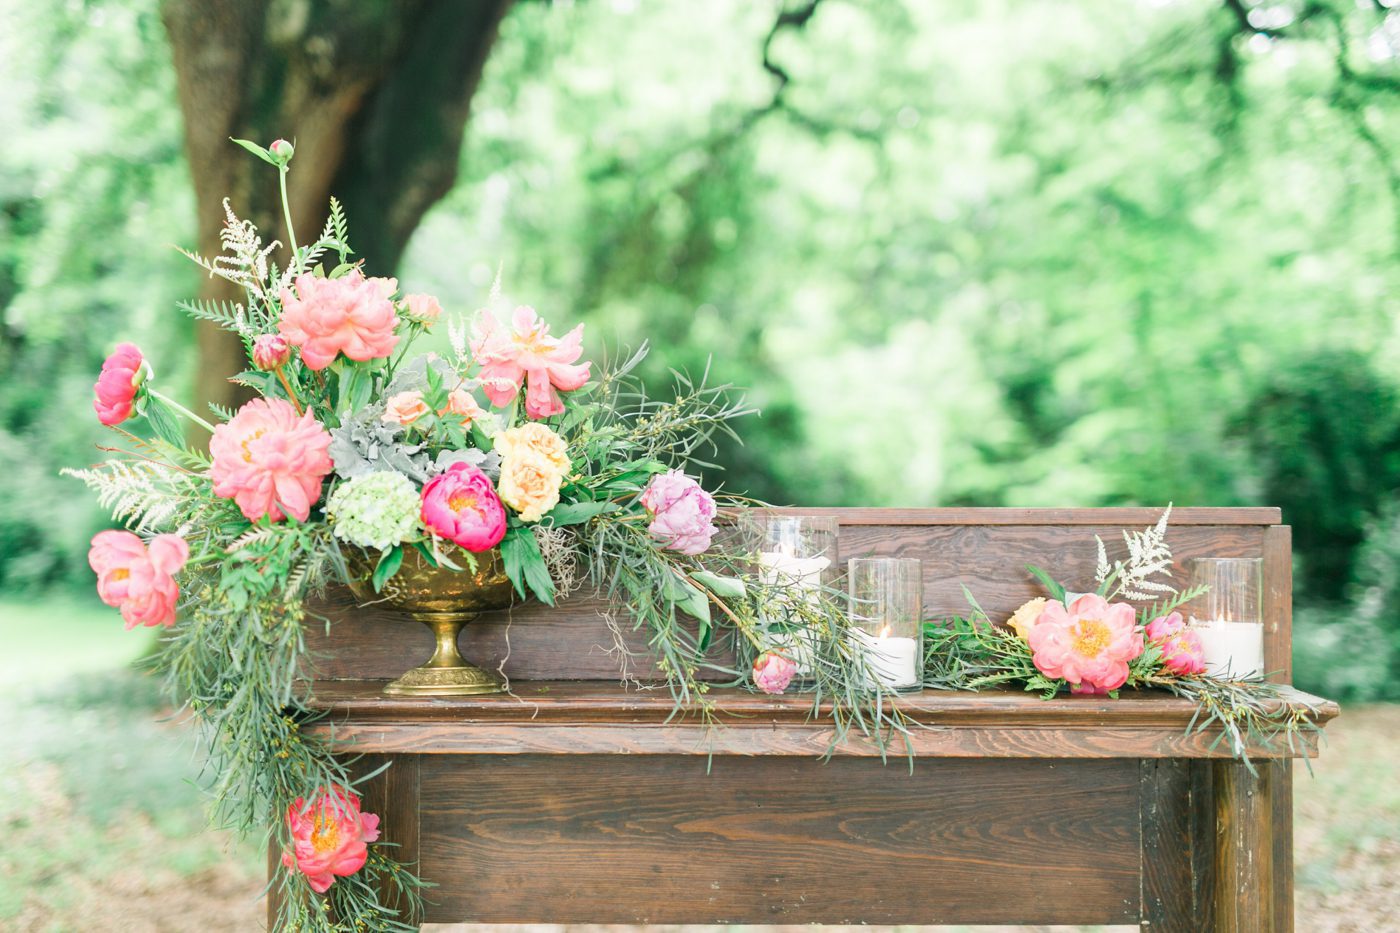 Antique fireplace mantel wedding decor idea with beautiful flowers and candles. Photo by Charleston wedding photographer Catherine Ann Photography